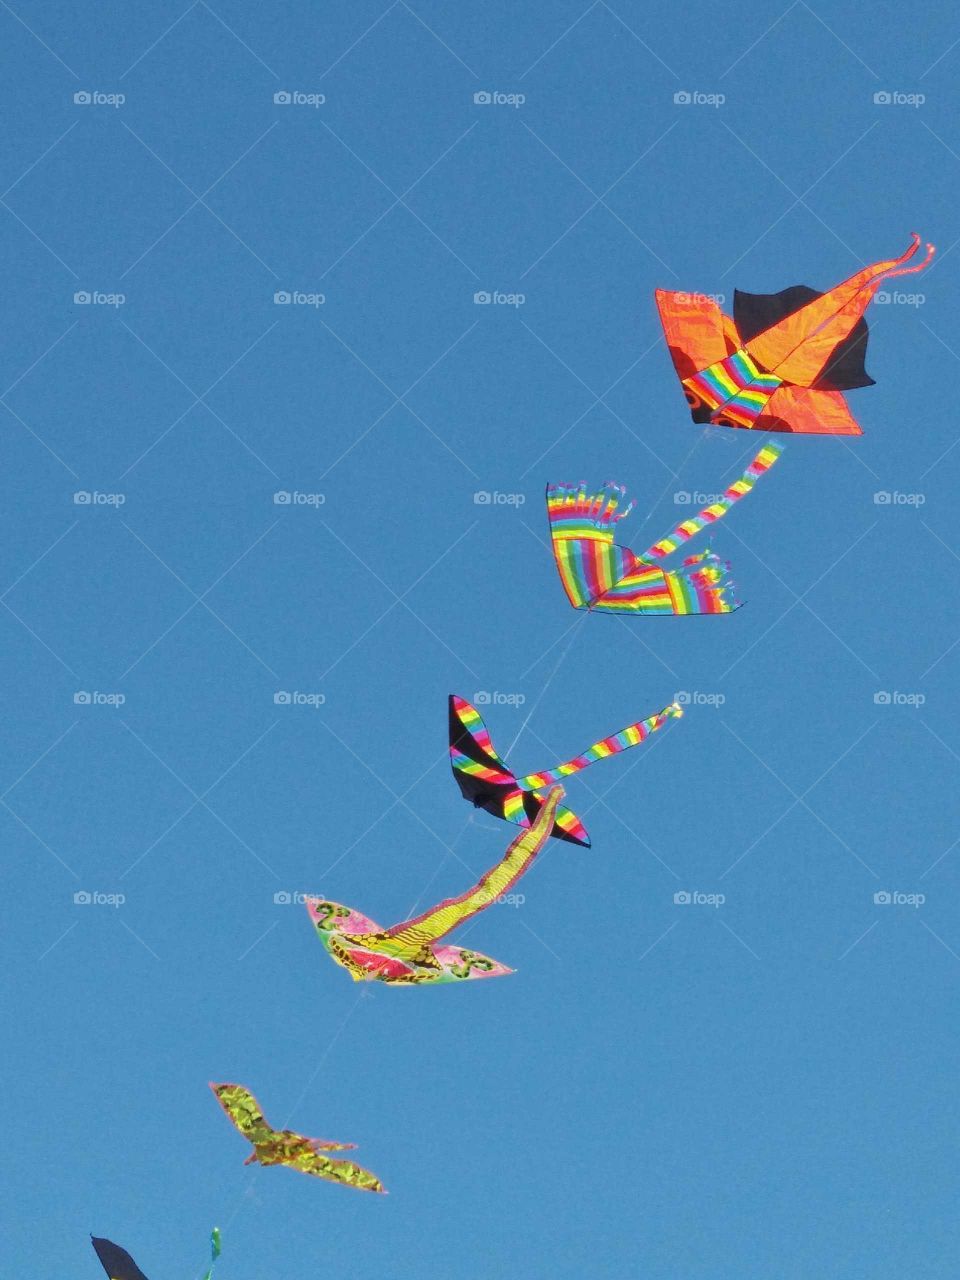 A group of colorful flying kites in the blue sky